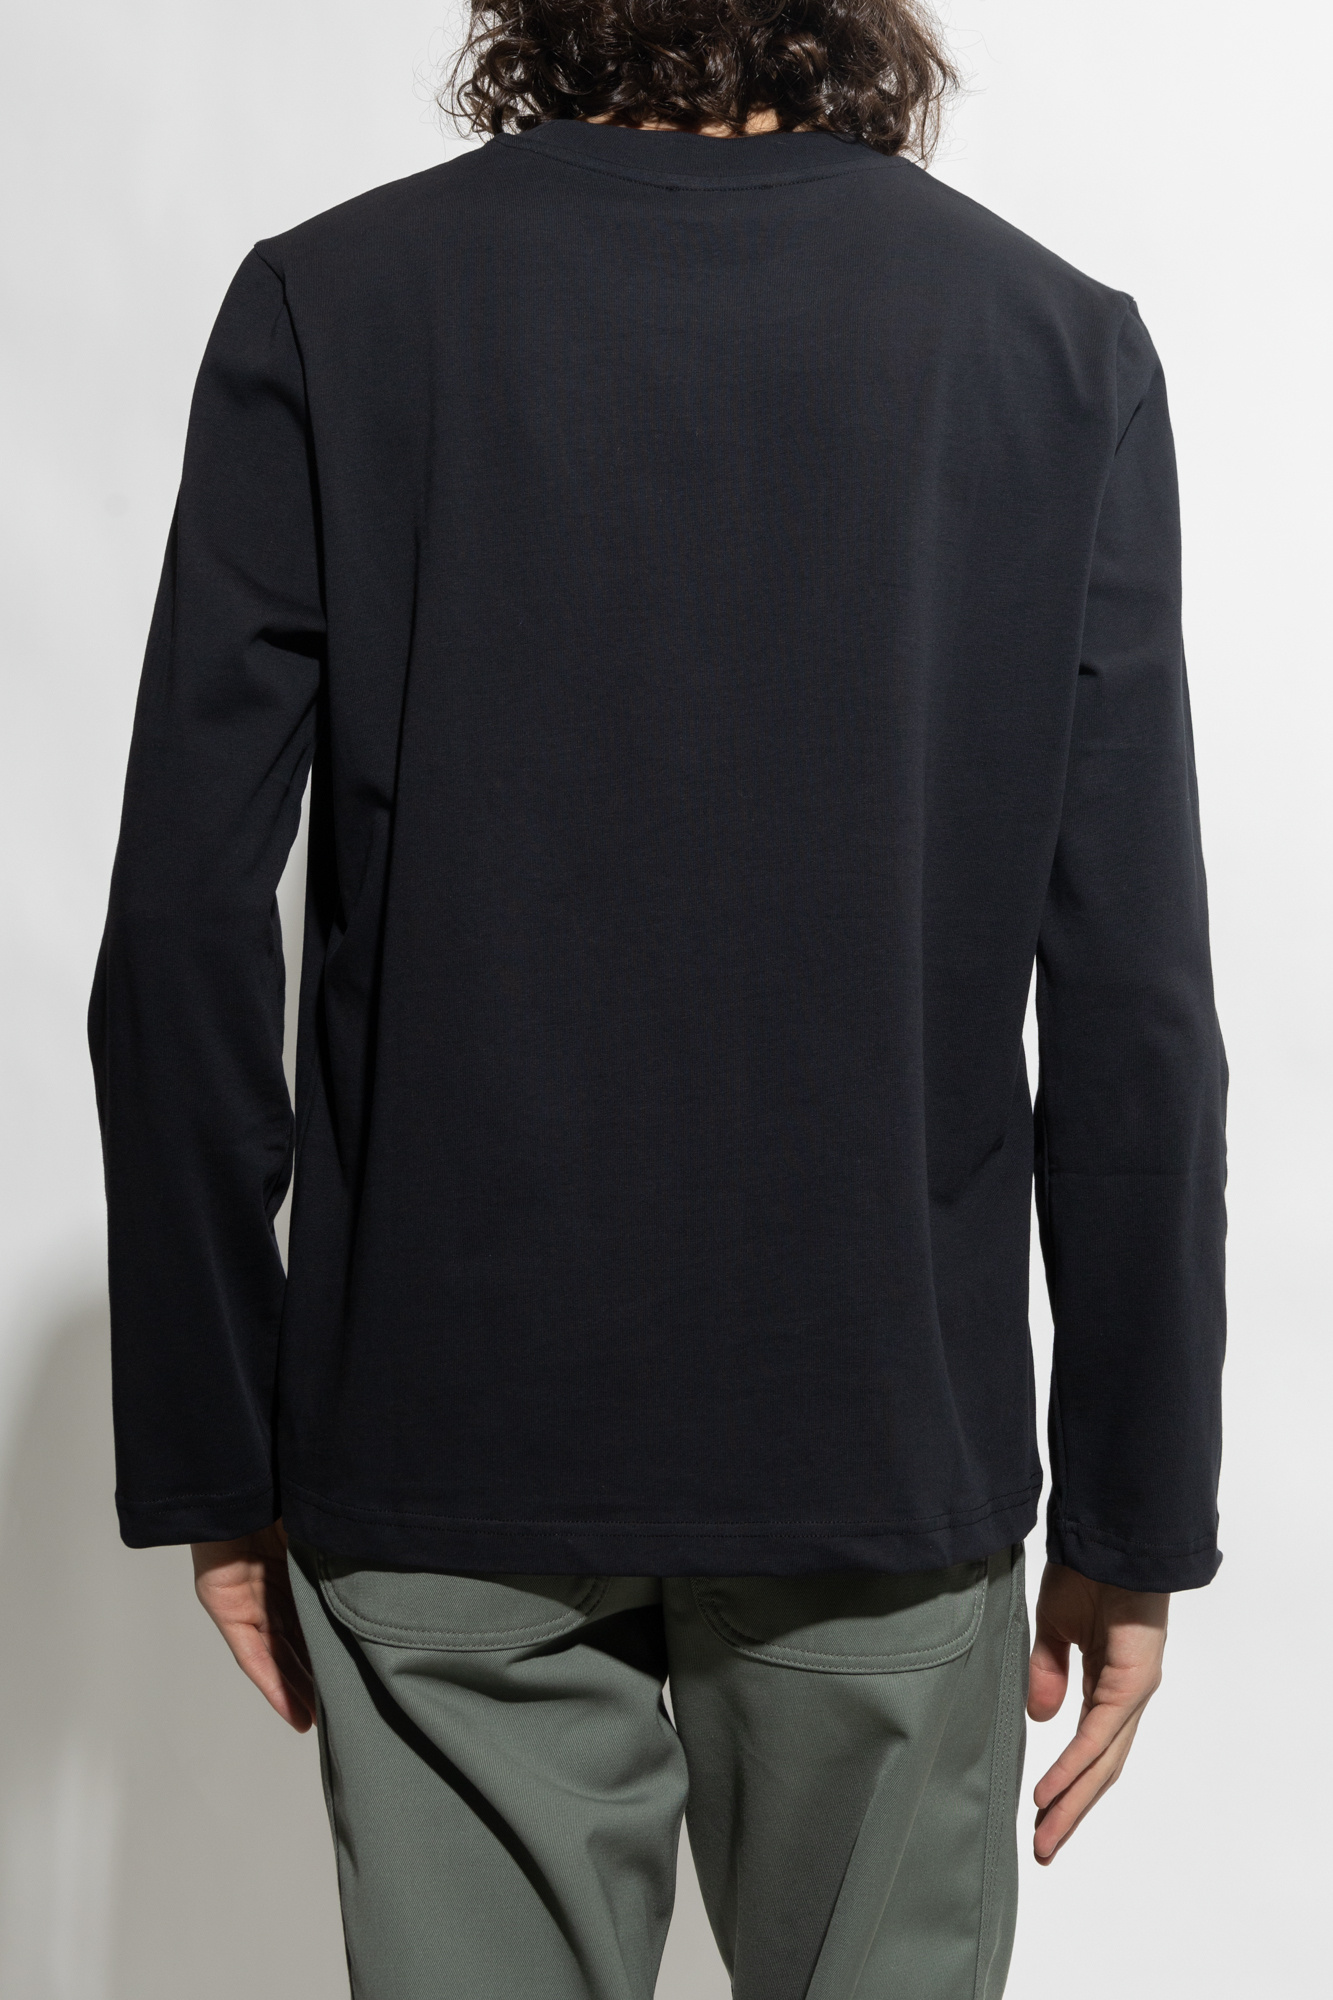 A.P.C. ‘Olivier’ T-shirt DKNY with long sleeves